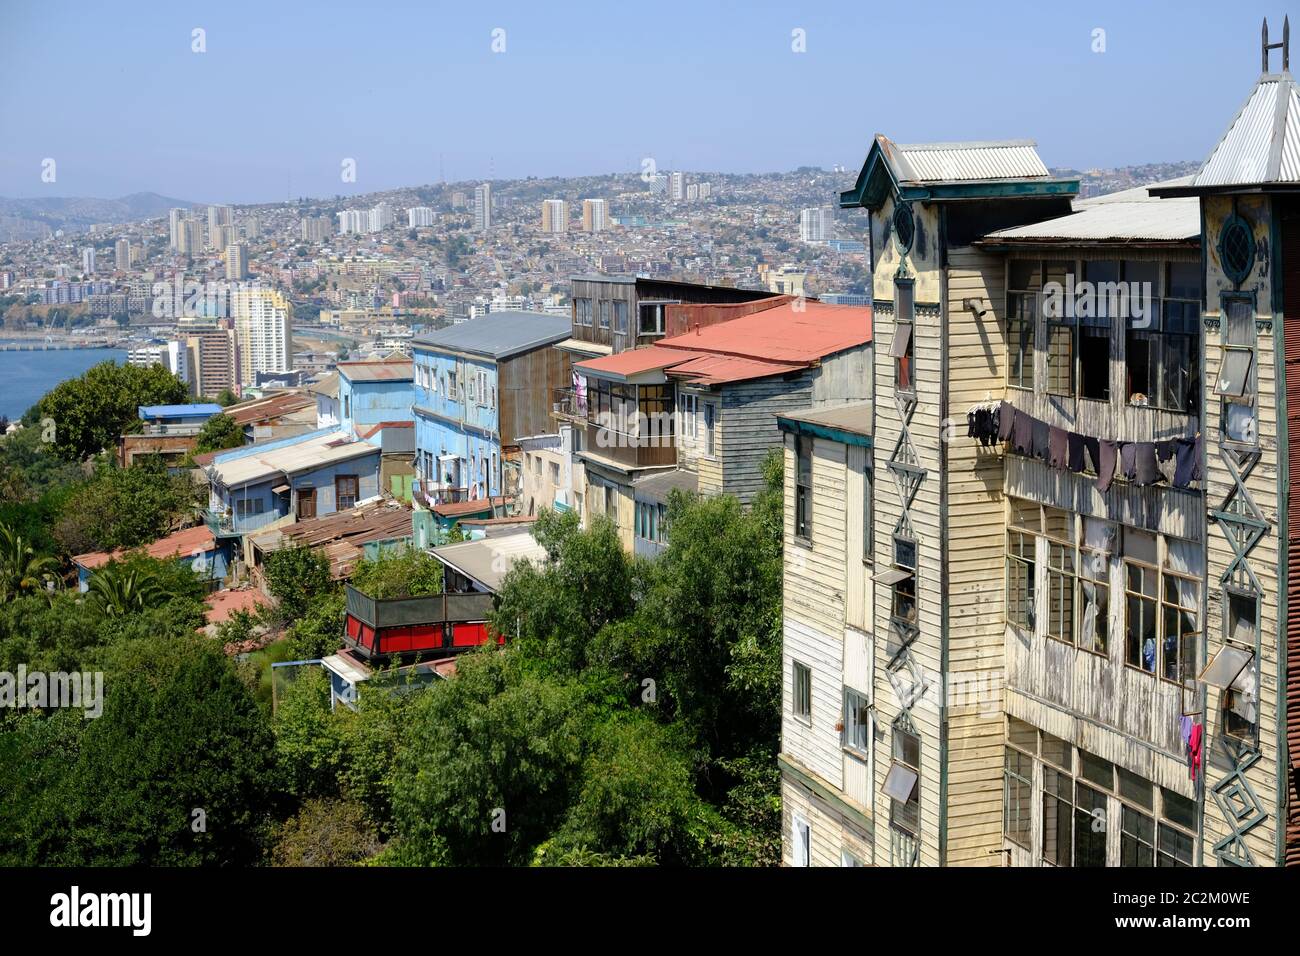 Chile Valparaiso - Observation deck view Stock Photo